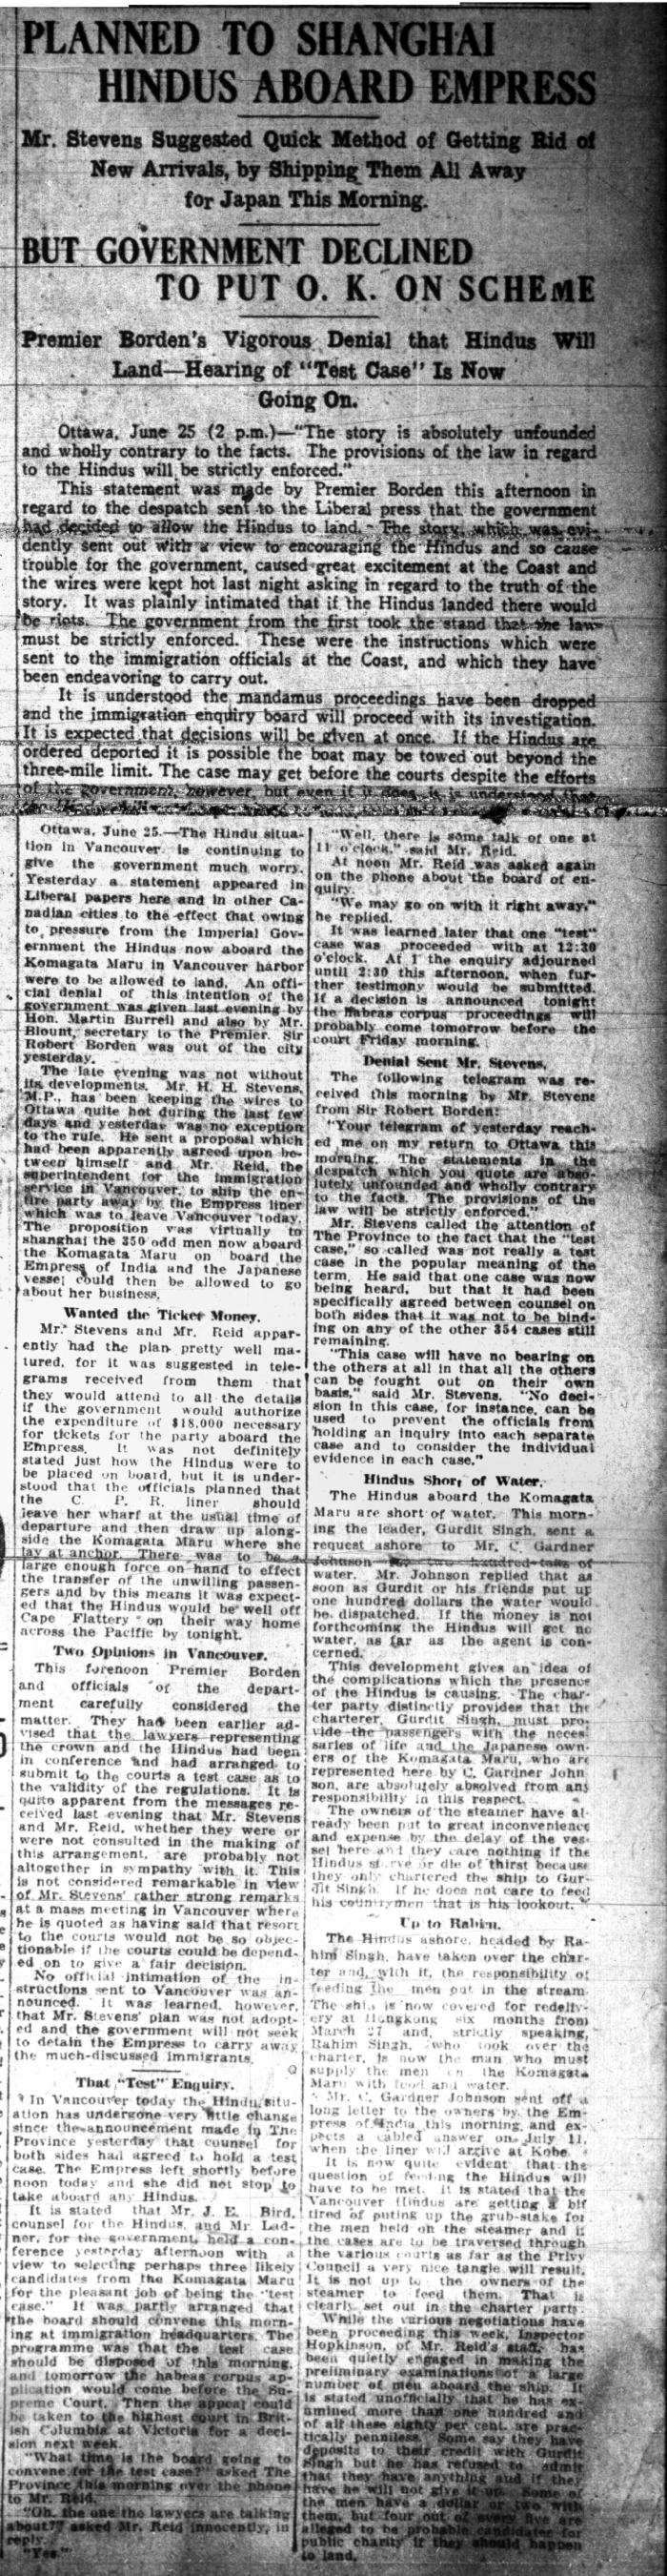 Newsclipping - Vancouver Daily Province: Planned to shanghai Hindus aboard Empress. Page 1